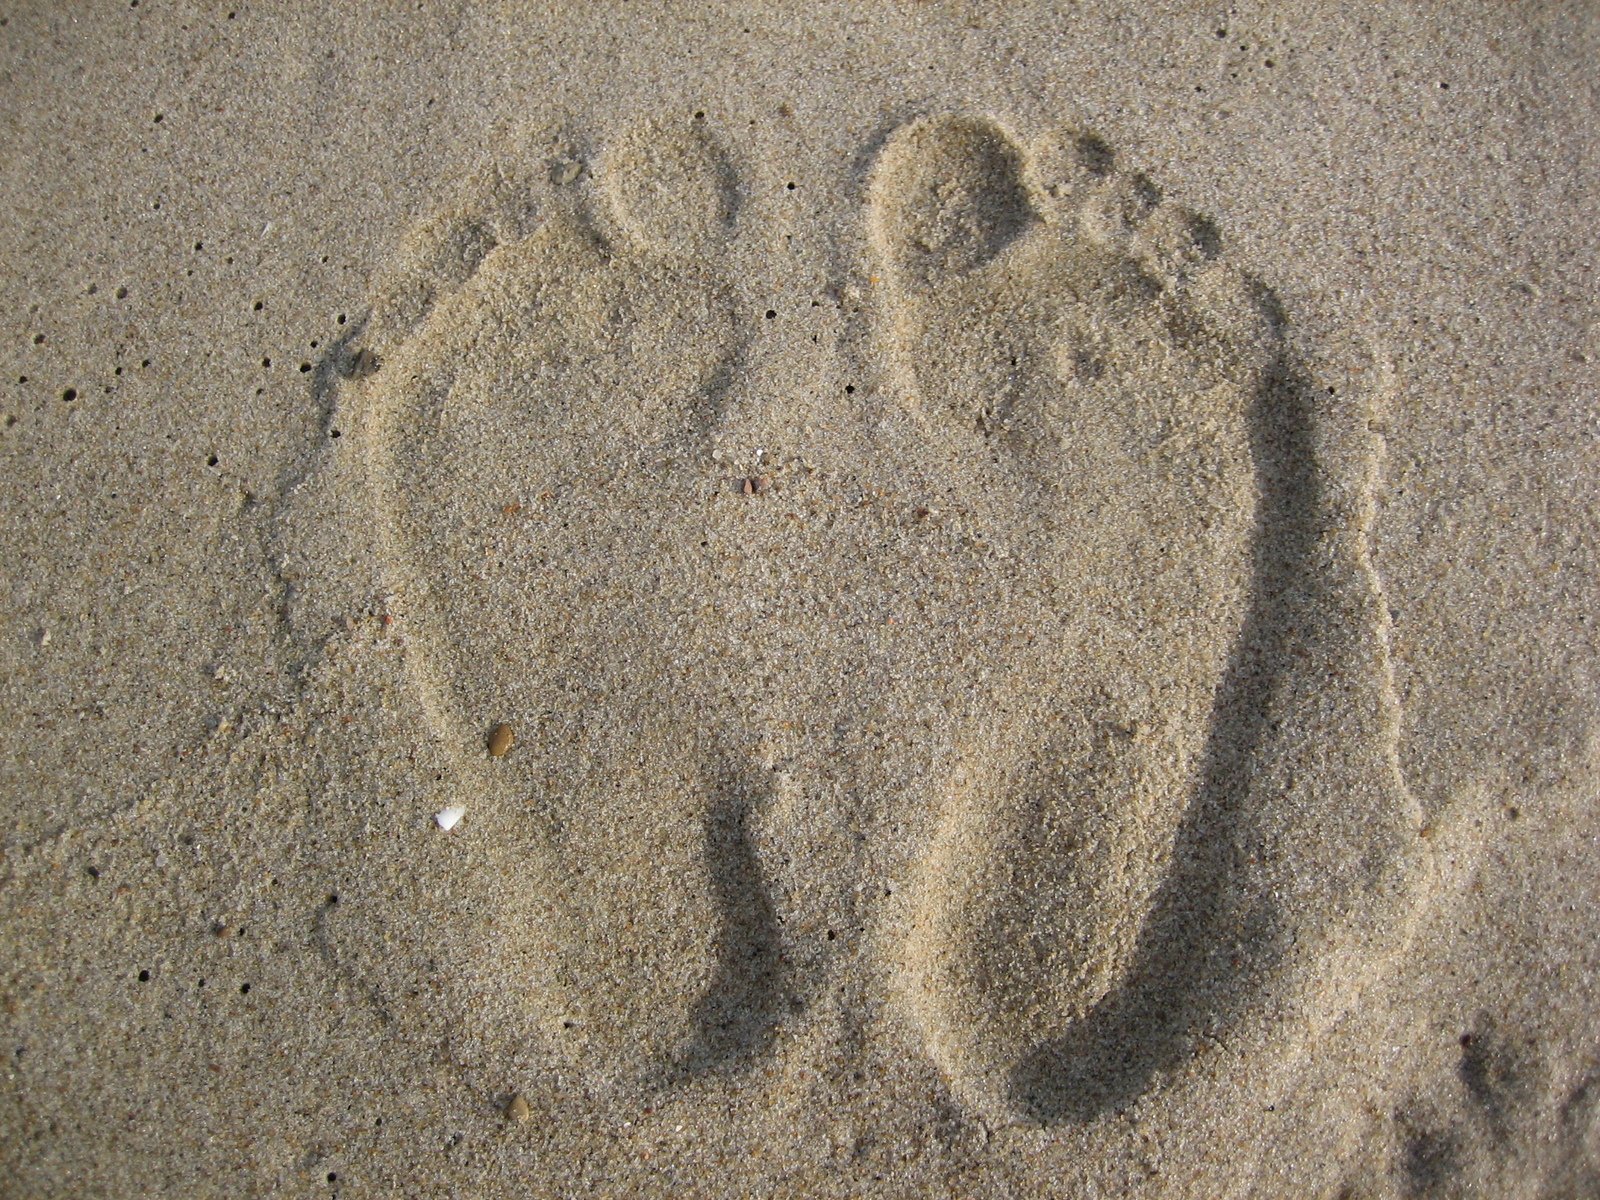 the footprints of two people on a beach